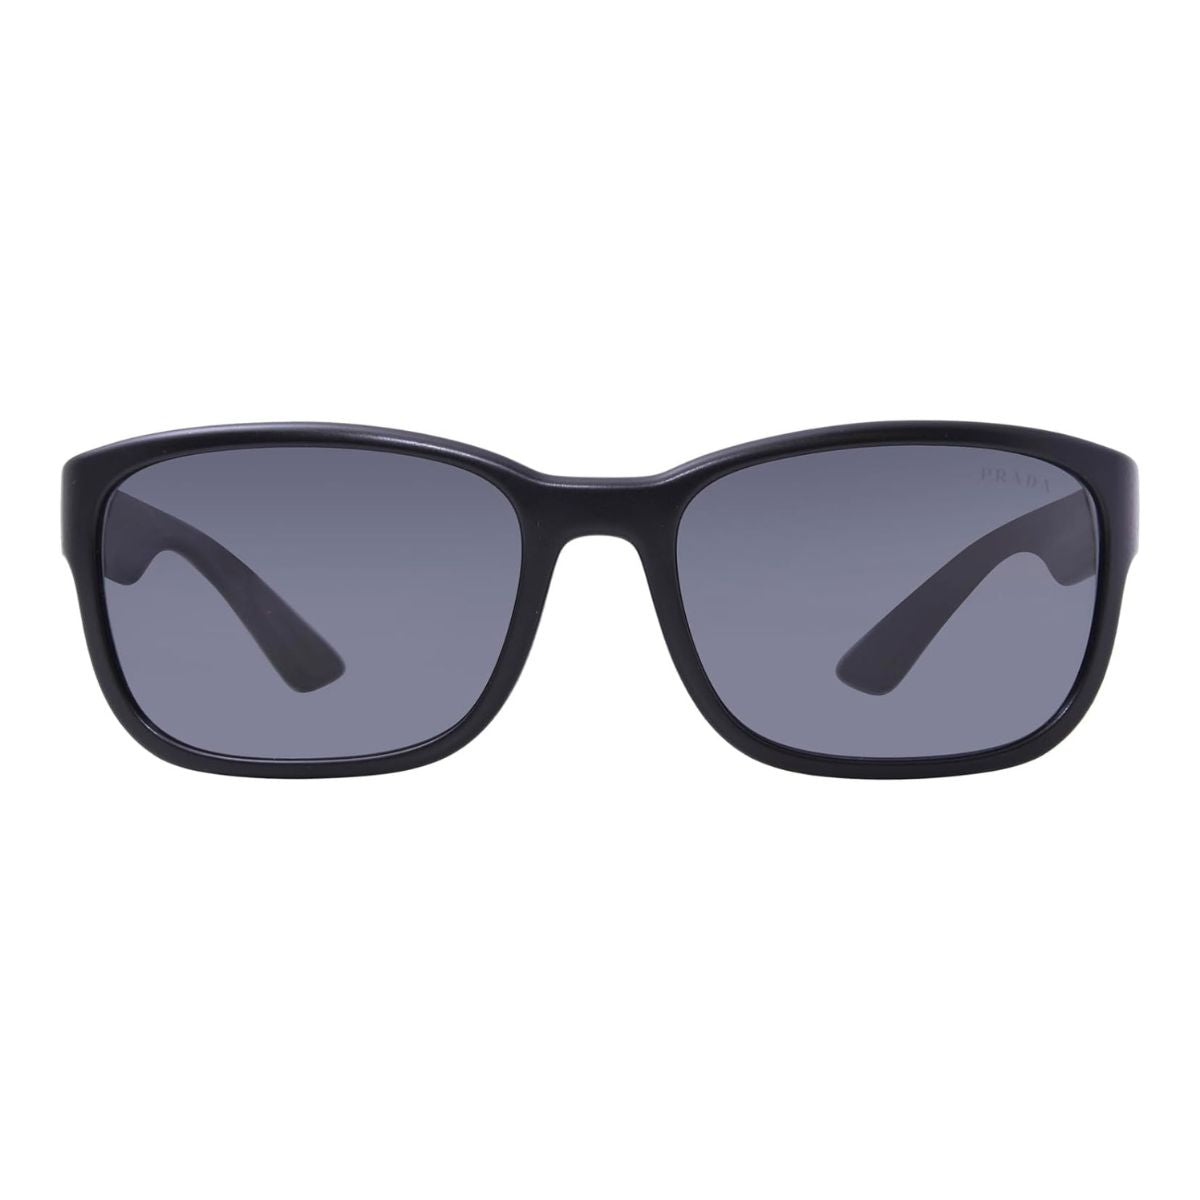 "Prada SpS05V 1BO-5S0 sunglasses for men in a sleek square grey frame, perfect for elevating any outfit. Shop now at Optorium for the latest Prada men's sunglasses collection."